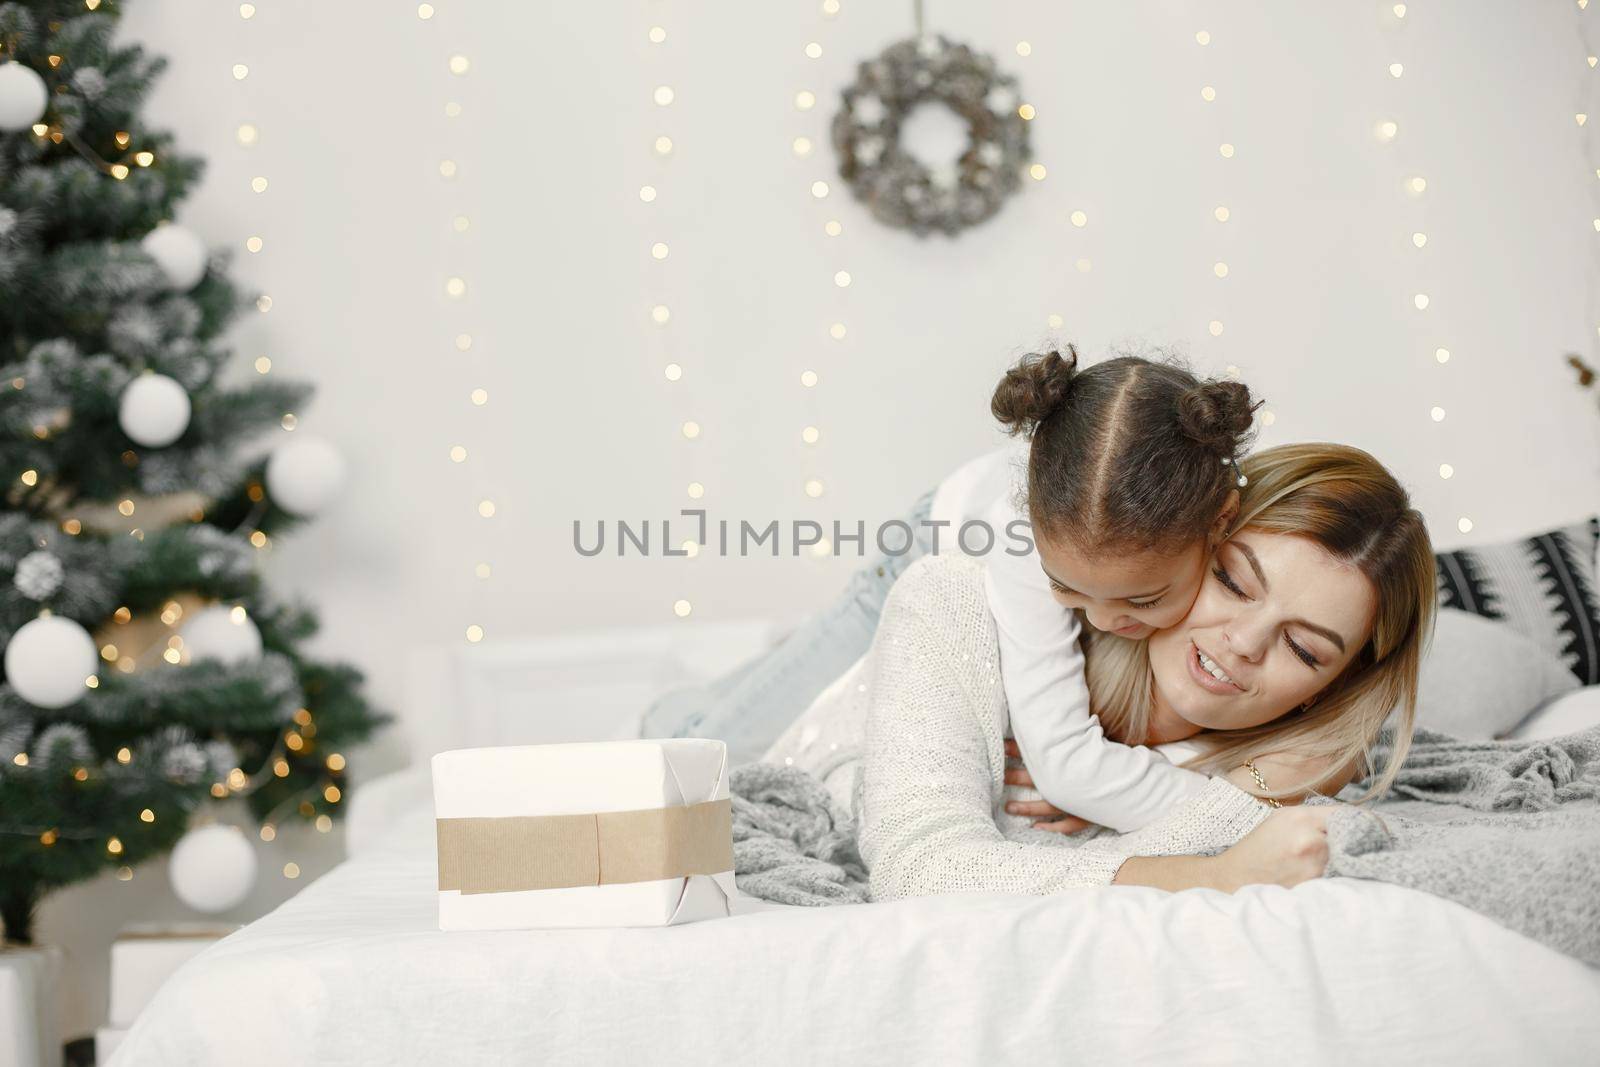 People reparing for Christmas. Mother playing with her daughter. Family is resting in a festive room. Child in a sweater sweater.